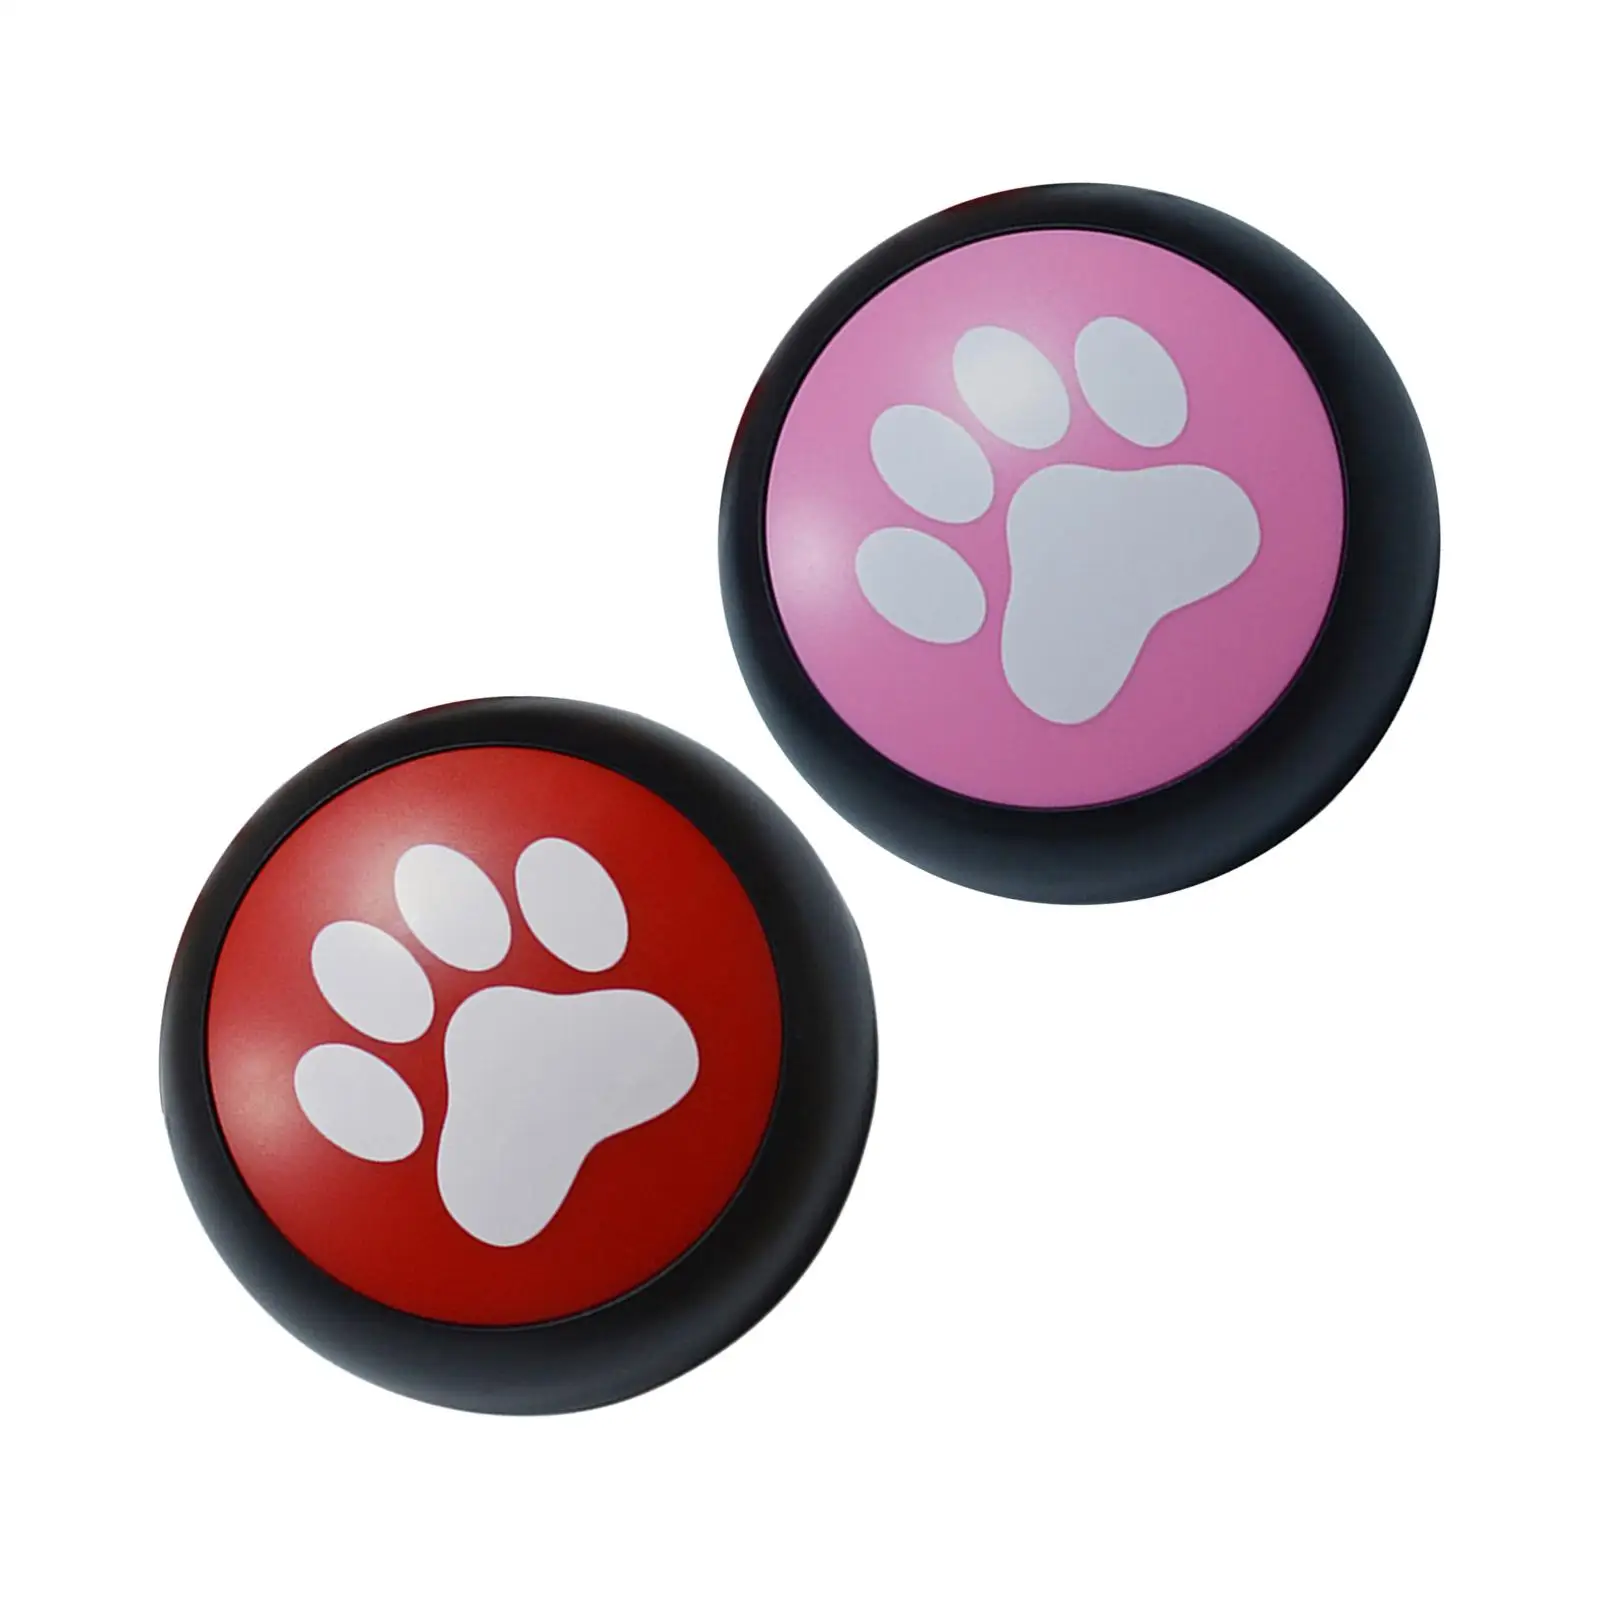 Recordable Sound Button Communication Talking Recorder Playback Recorder Voice Recording Button for Kids Learning Pet Training